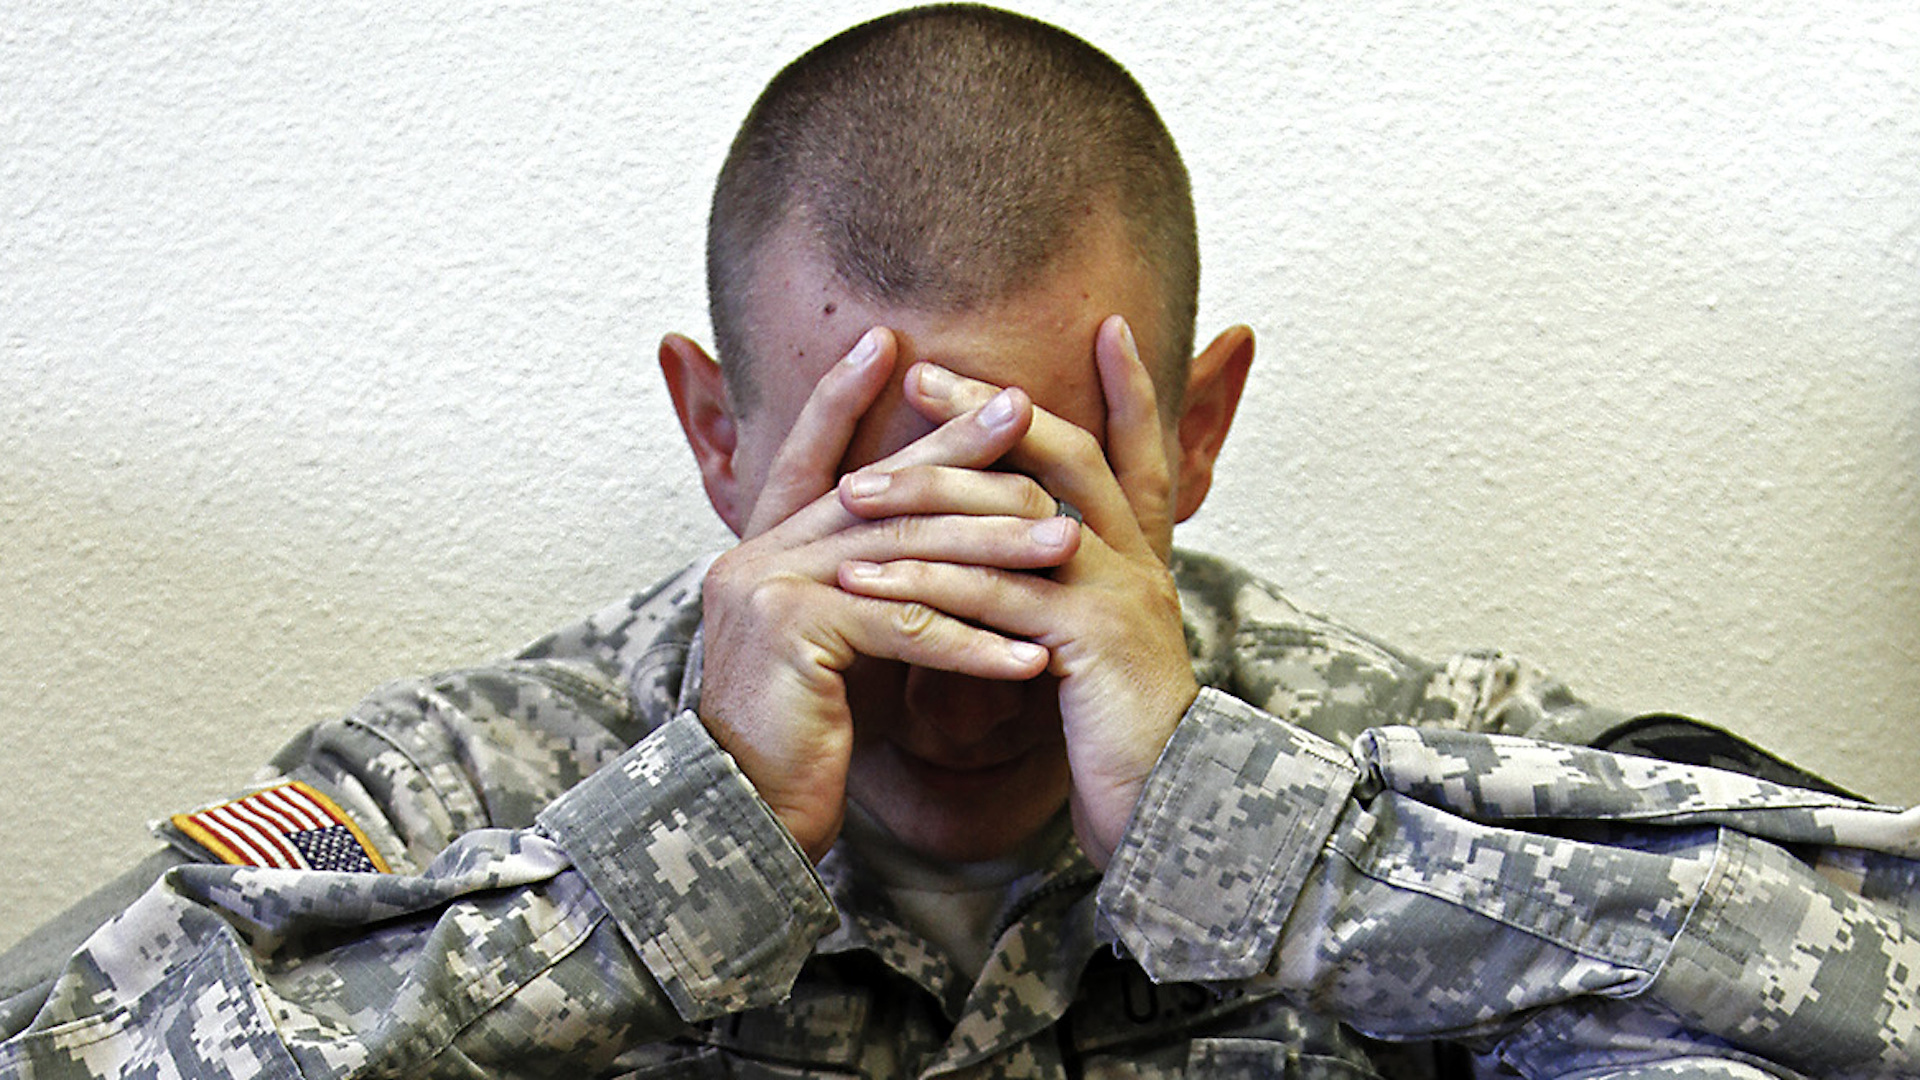 Military suicide prevention